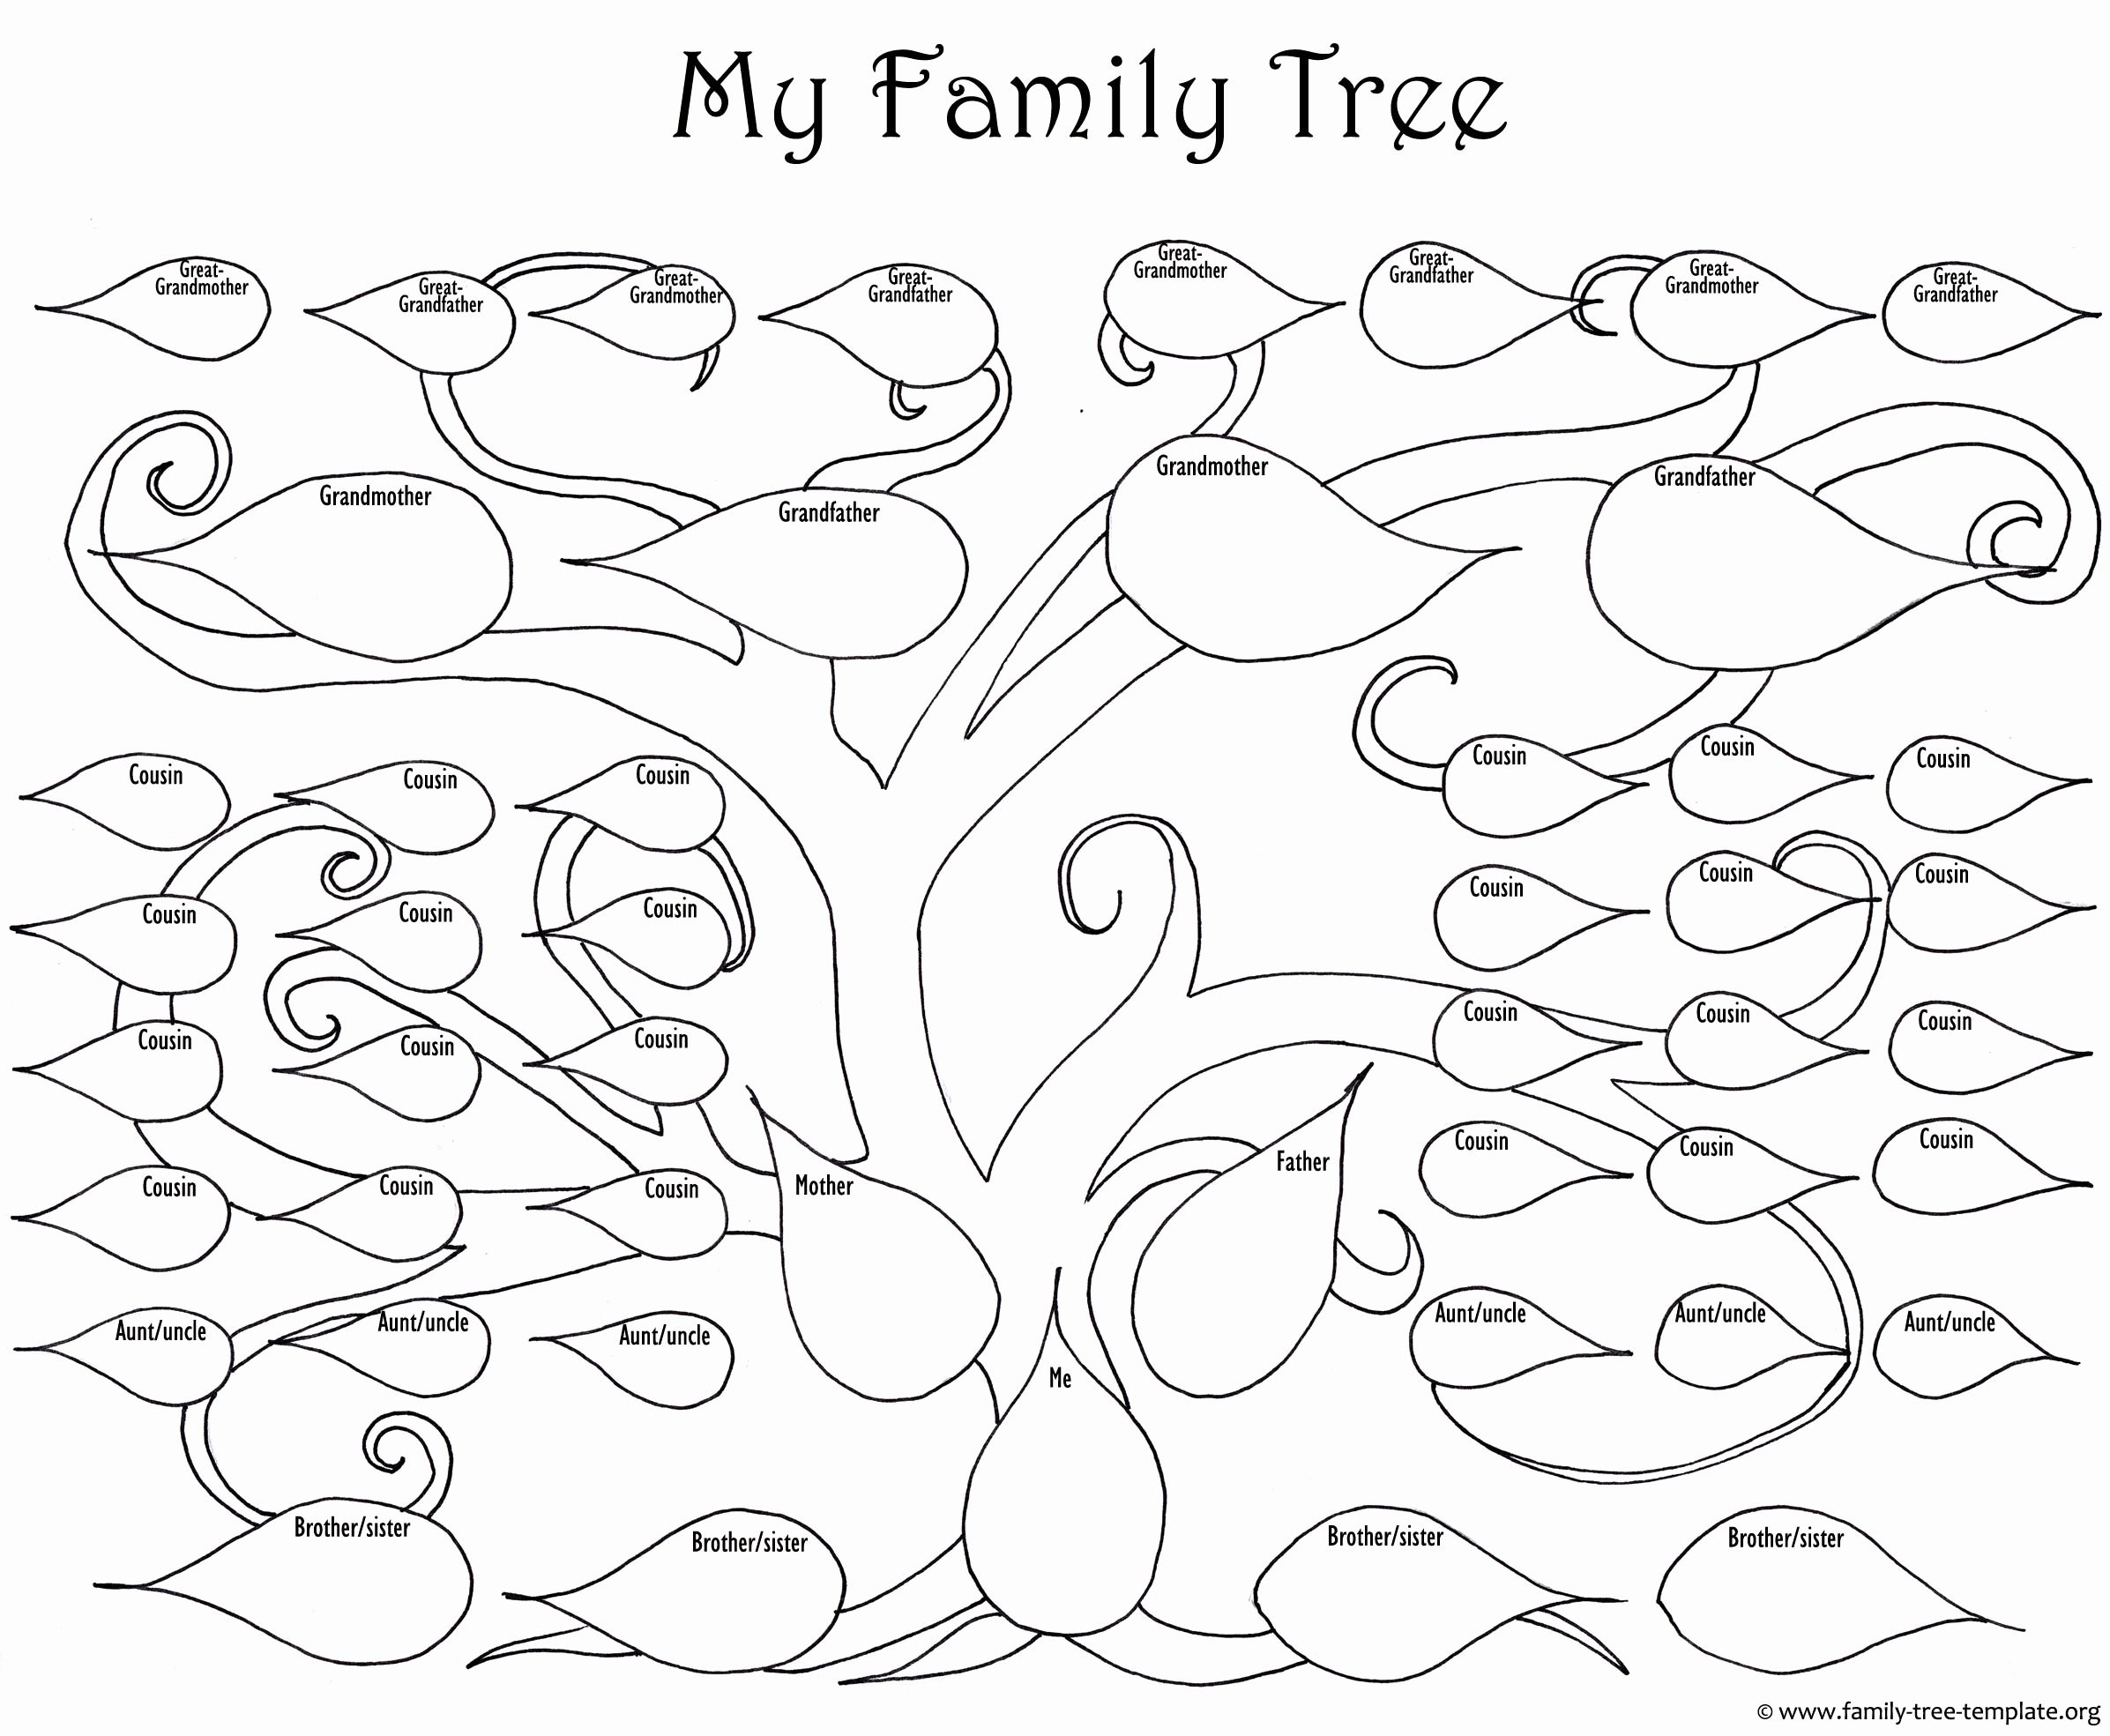 A Printable Blank Family Tree to Make Your Kids Genealogy